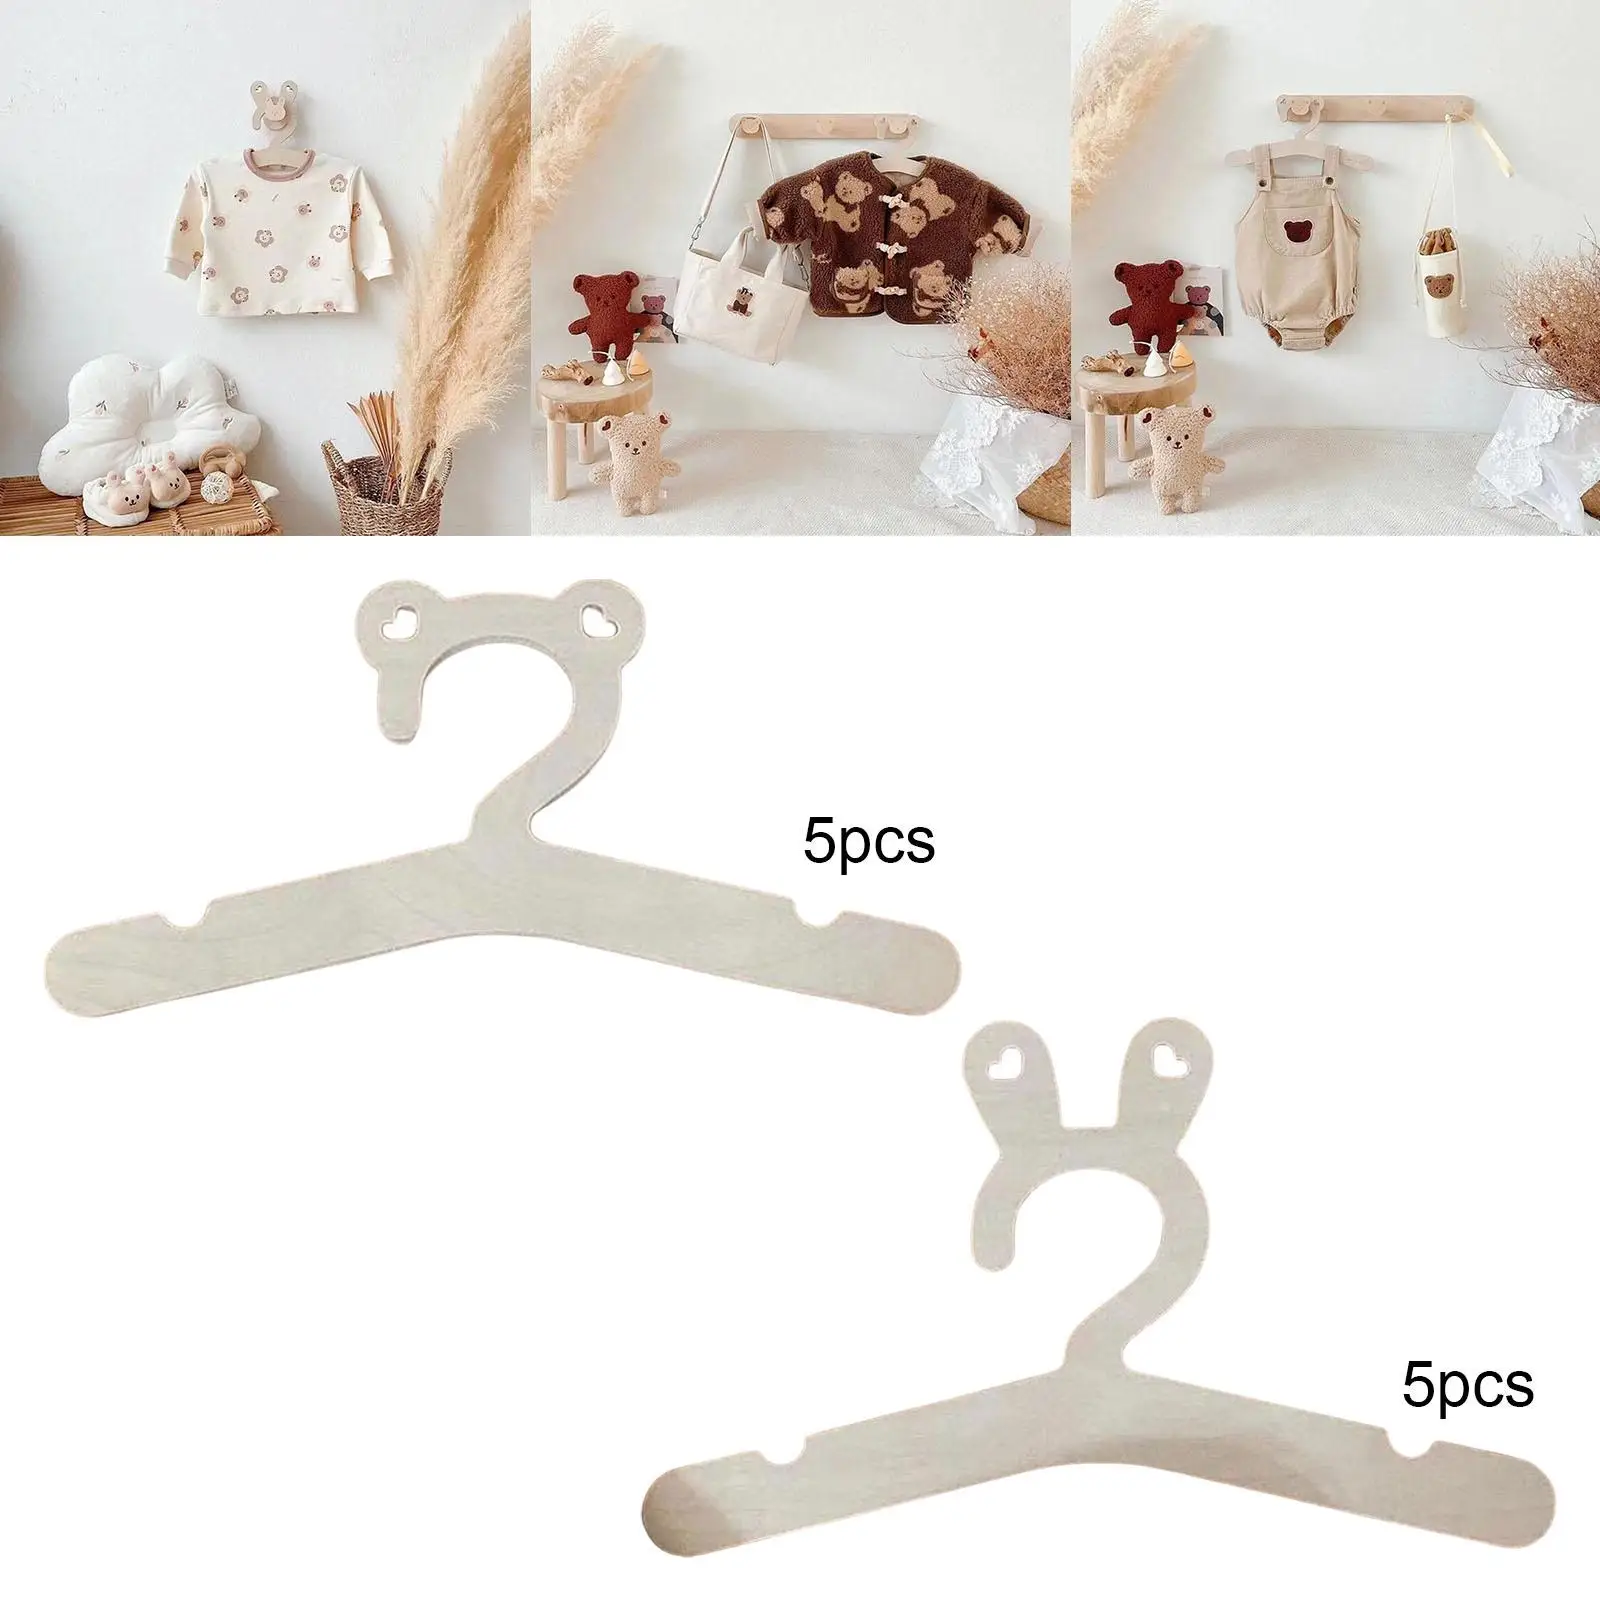 5 Pieces Wooden Creative Cute Accessories Children Clothes Hanger Hanger Rack Baby Clothes for Coat Pants Newborn Baby Gifts